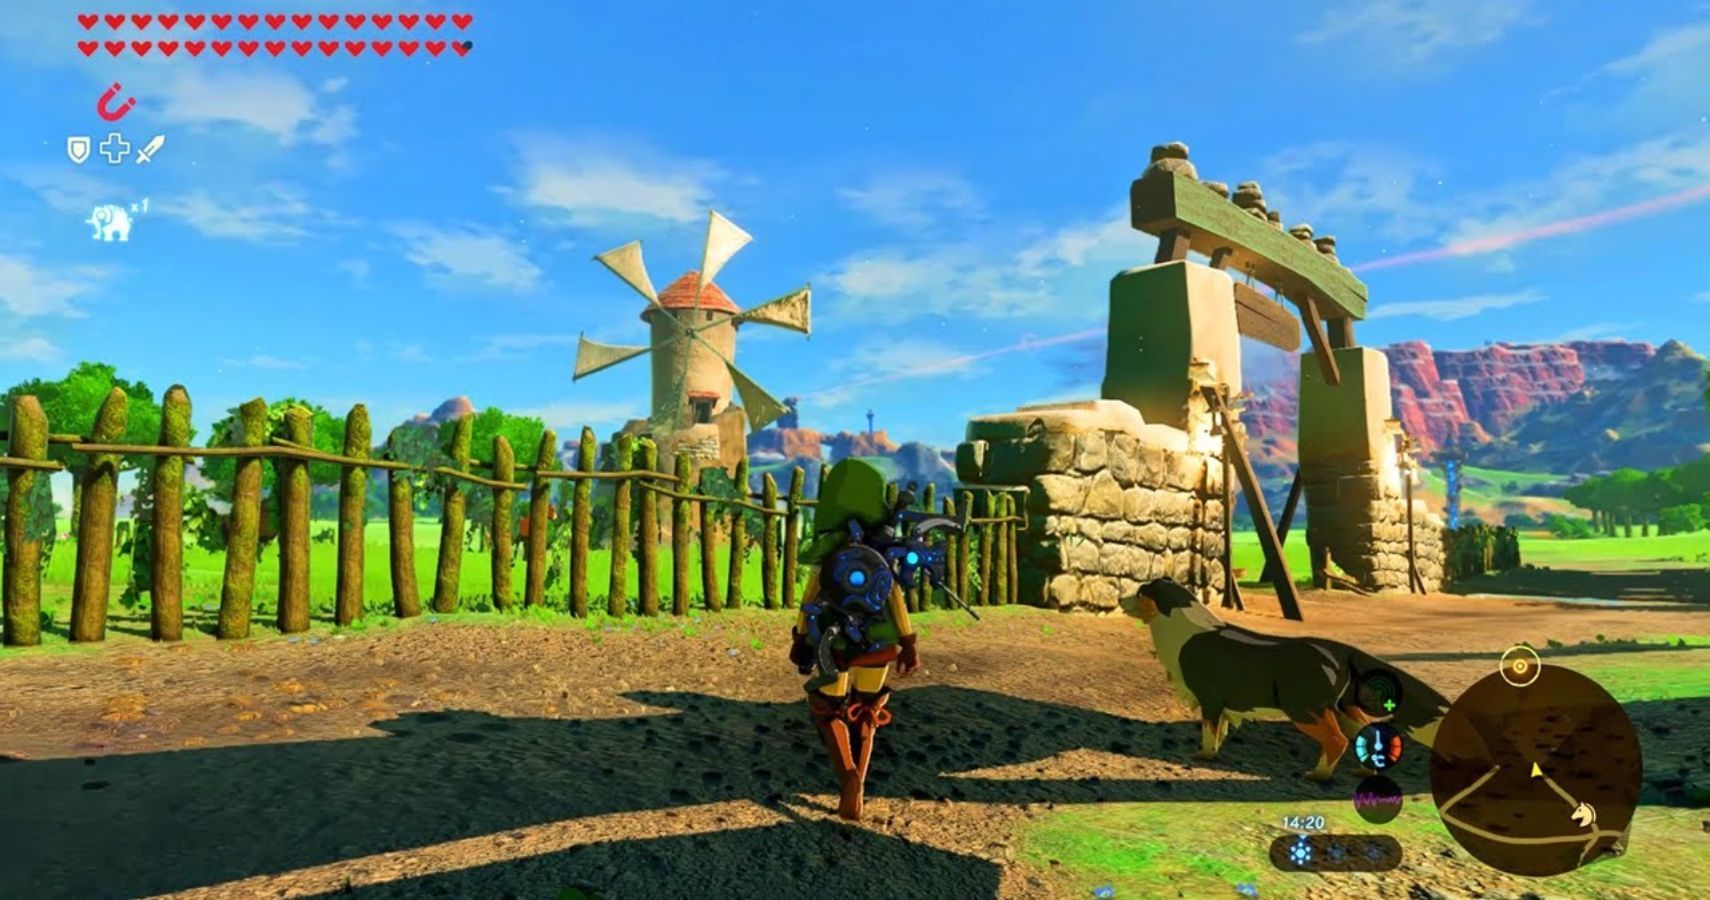 Iconic Ocarina Of Time Location Recreated In Zelda Breath Of The Wild With New Mod